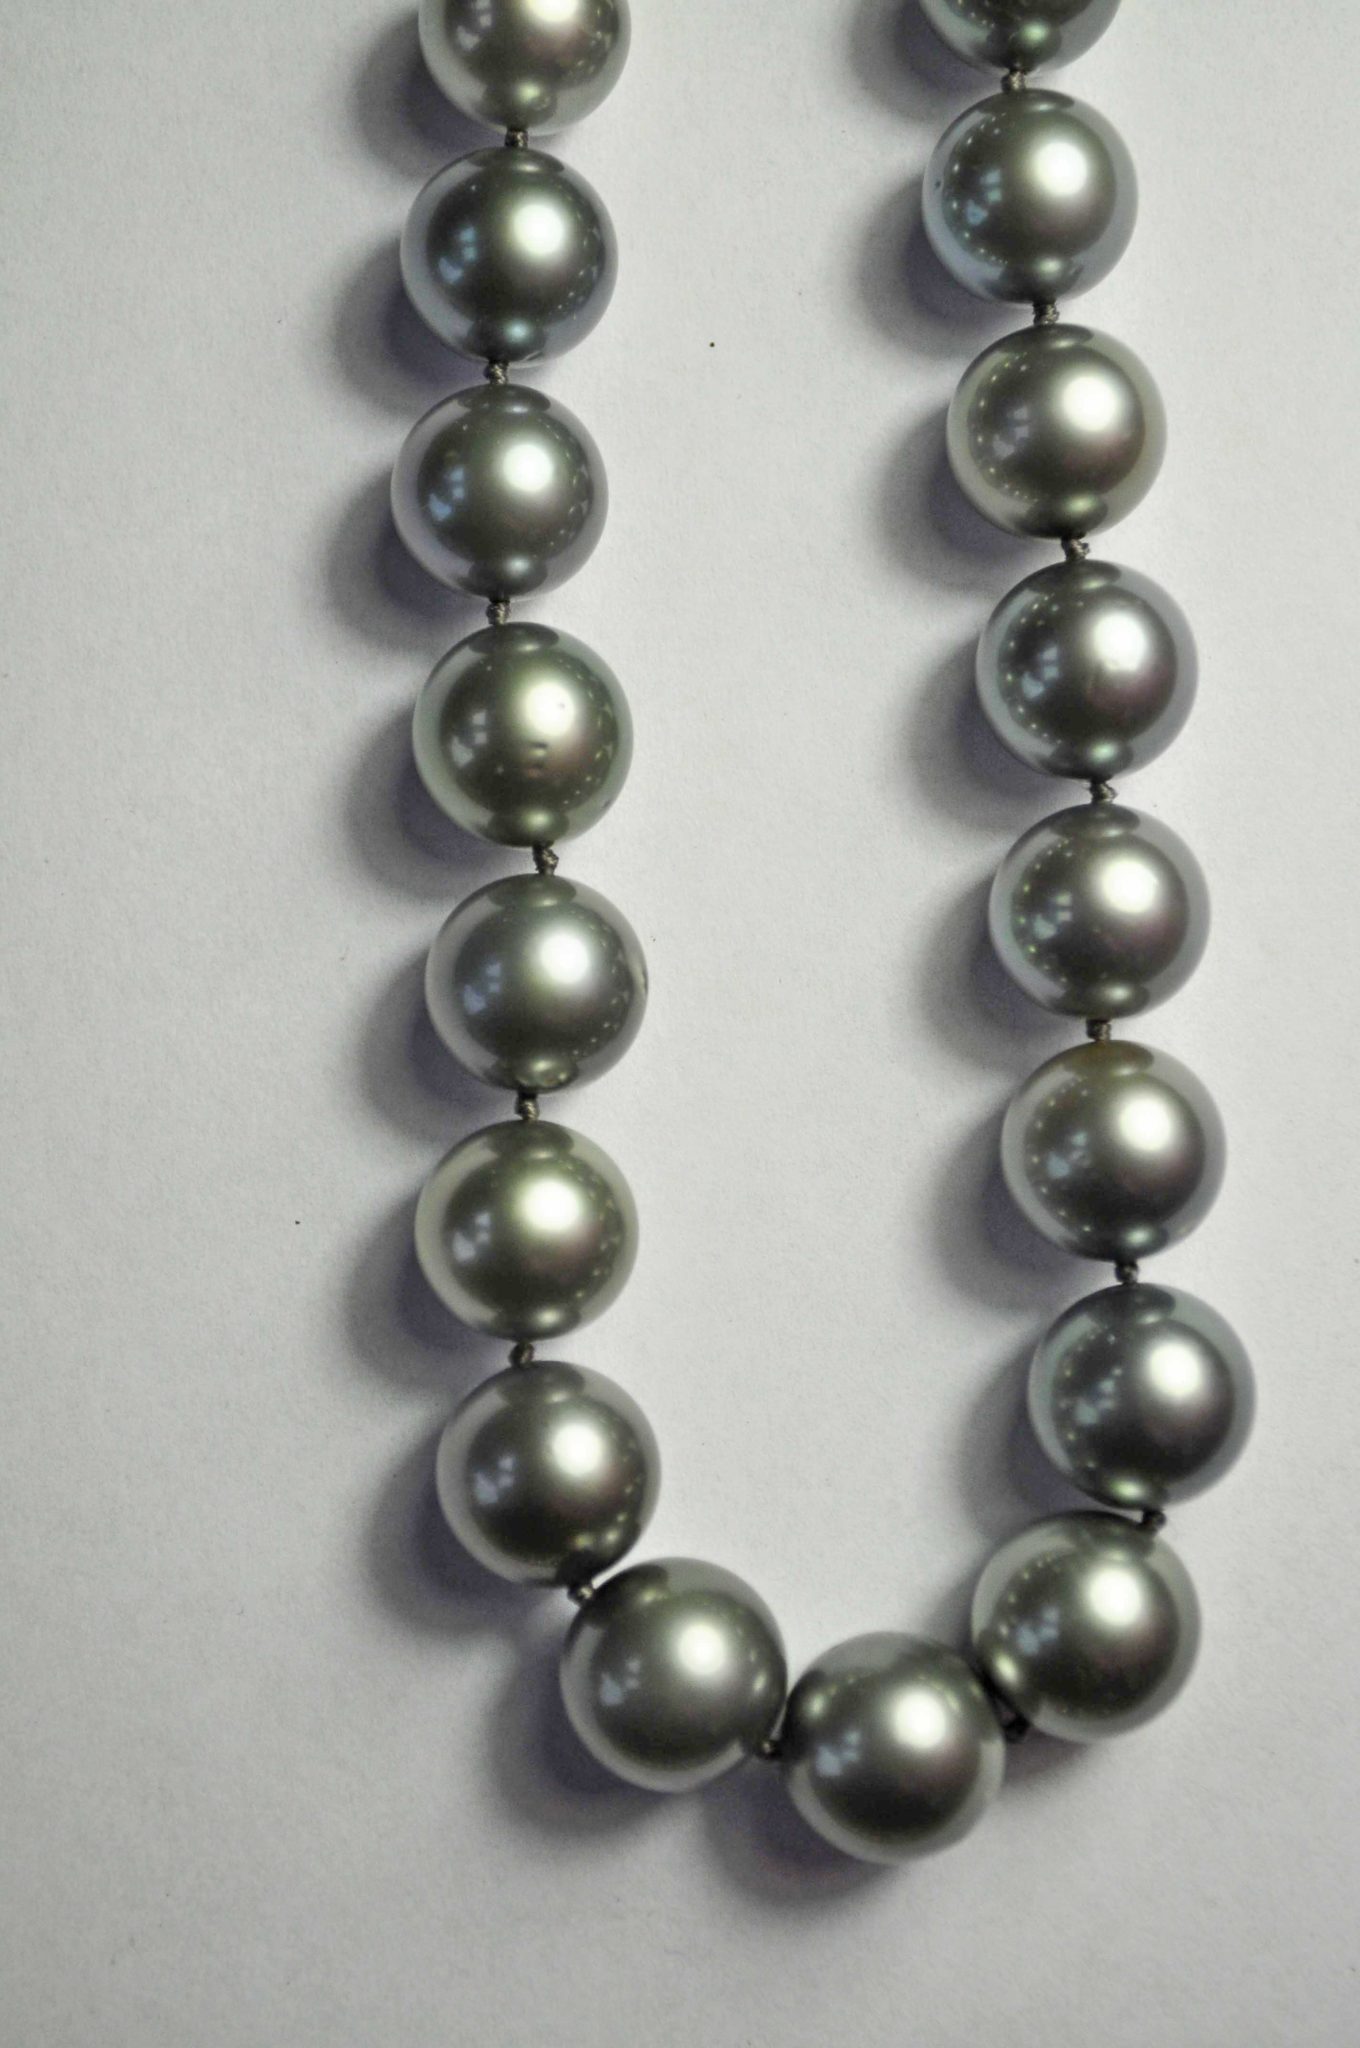 TAHITIAN PEARL NECKLACE